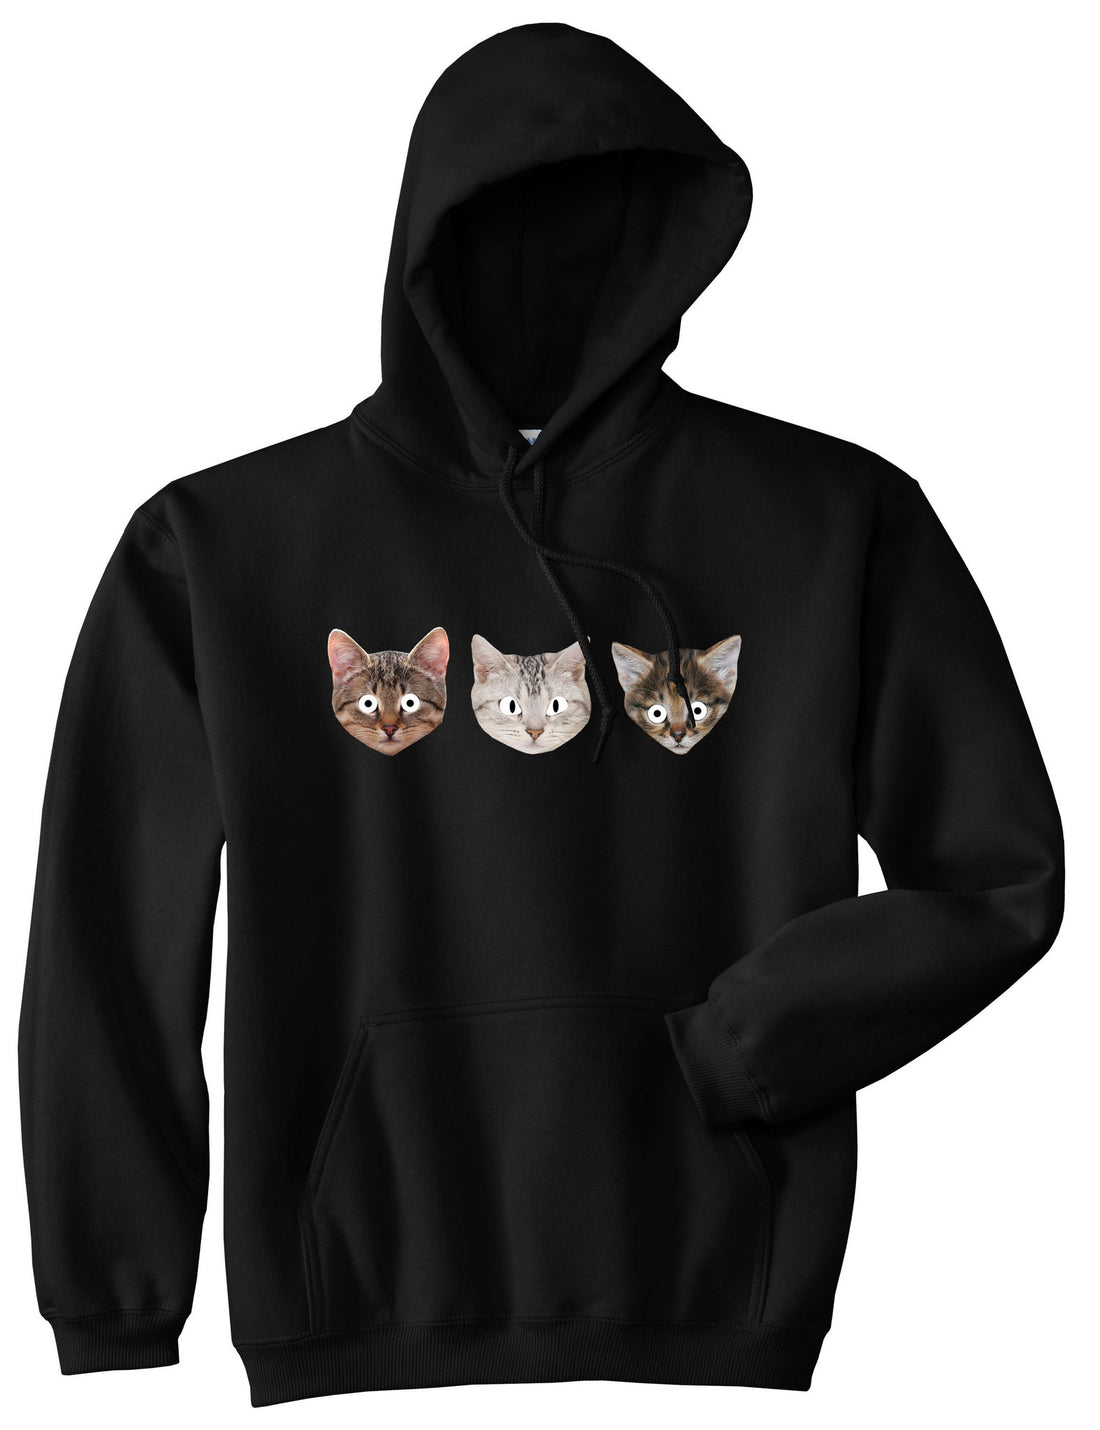 Cats Crazy Kittens Pullover Hoodie in Black By Kings Of NY